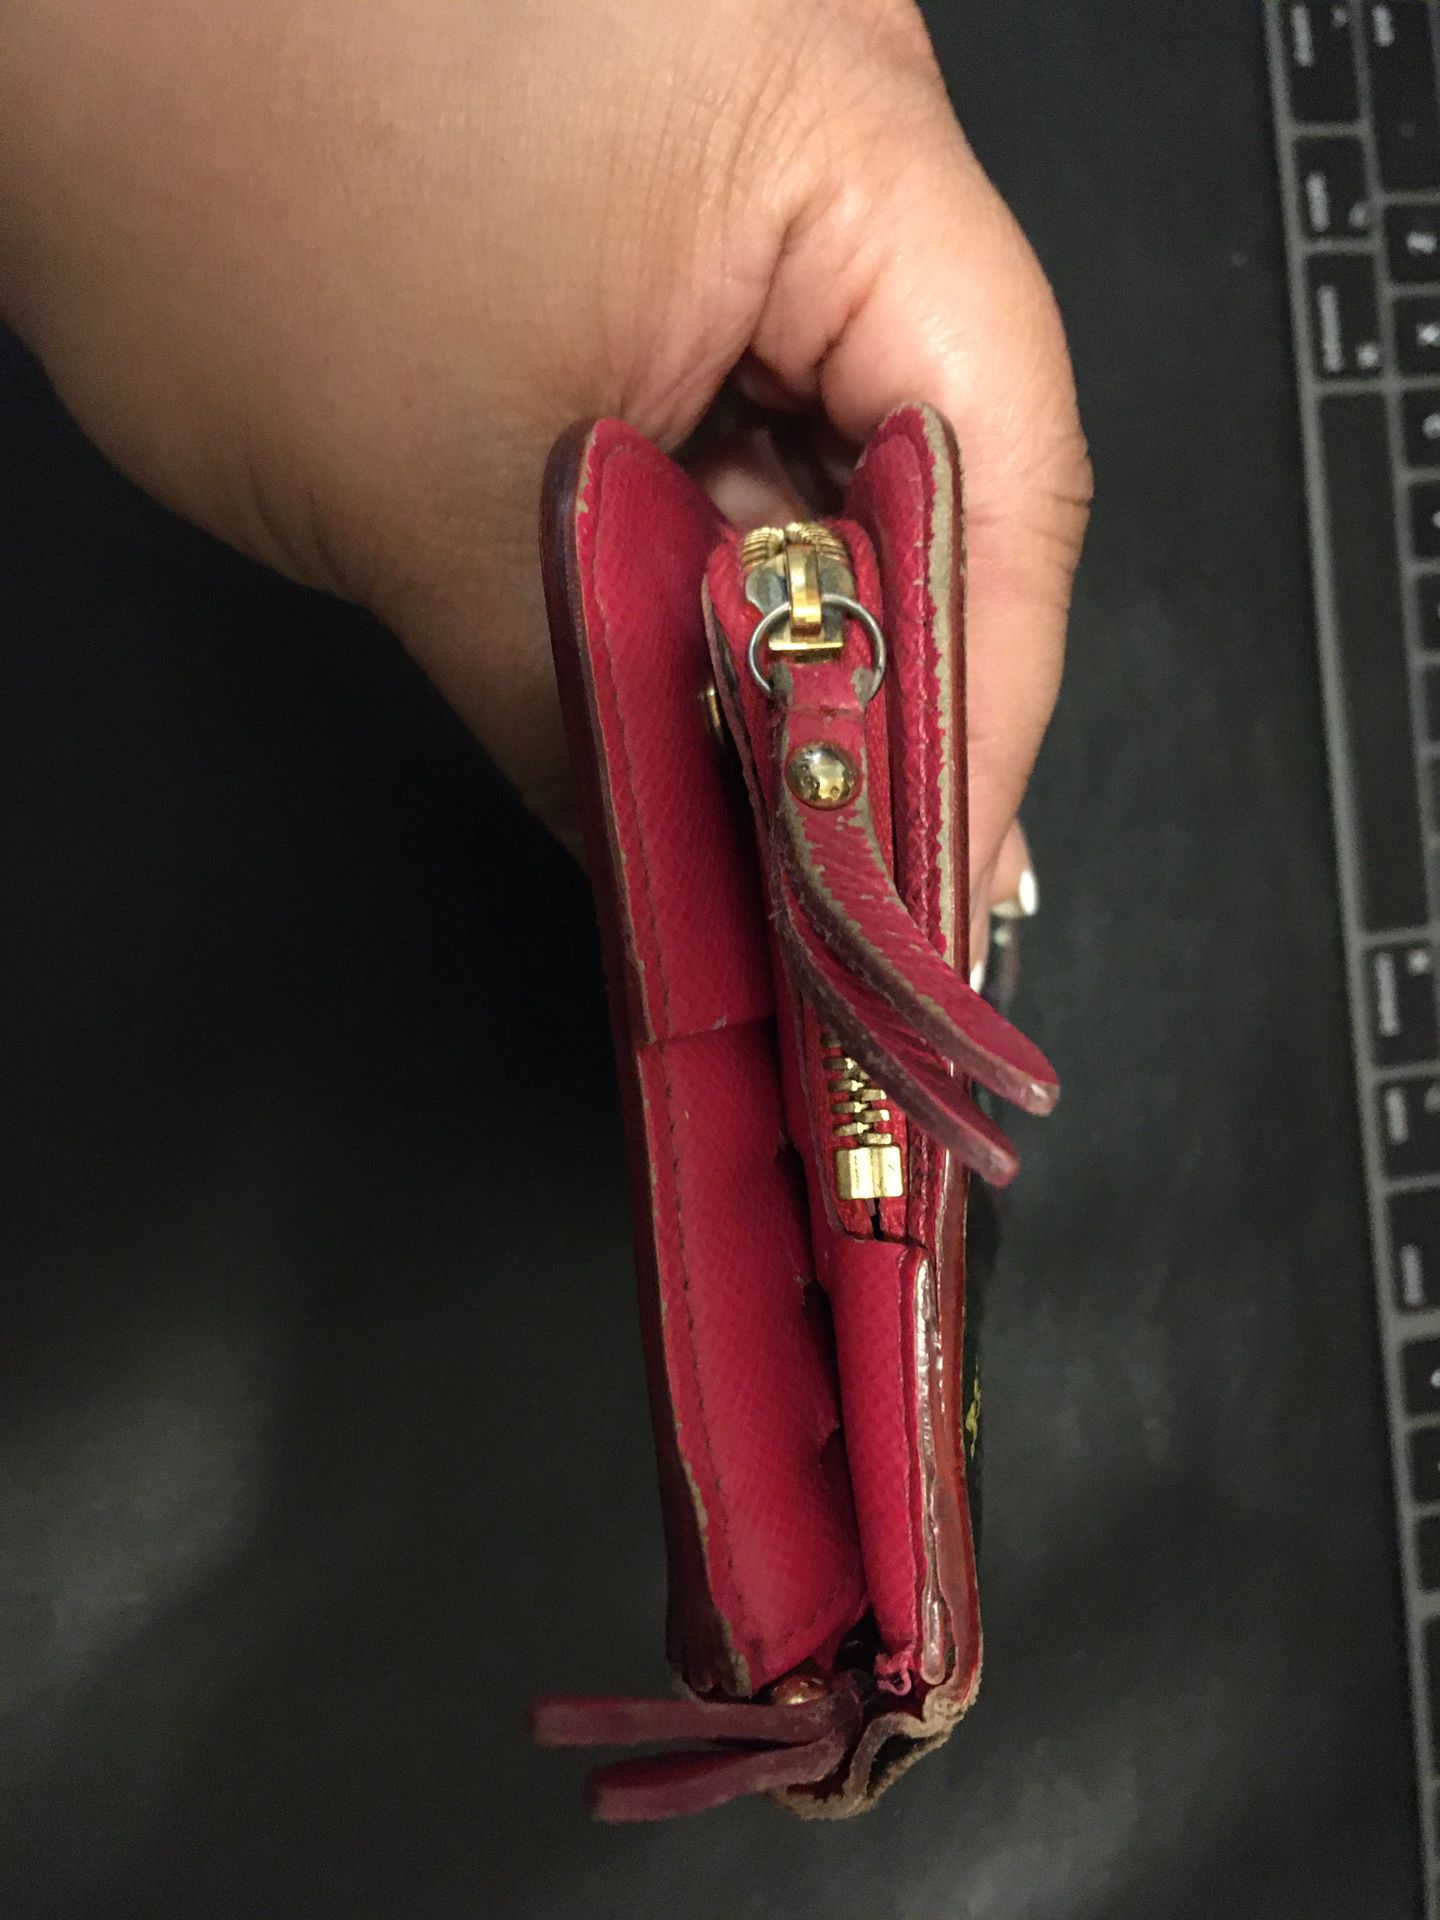 Authentic Louis Vuitton Insolite Wallet $375 Obo for Sale in Addison